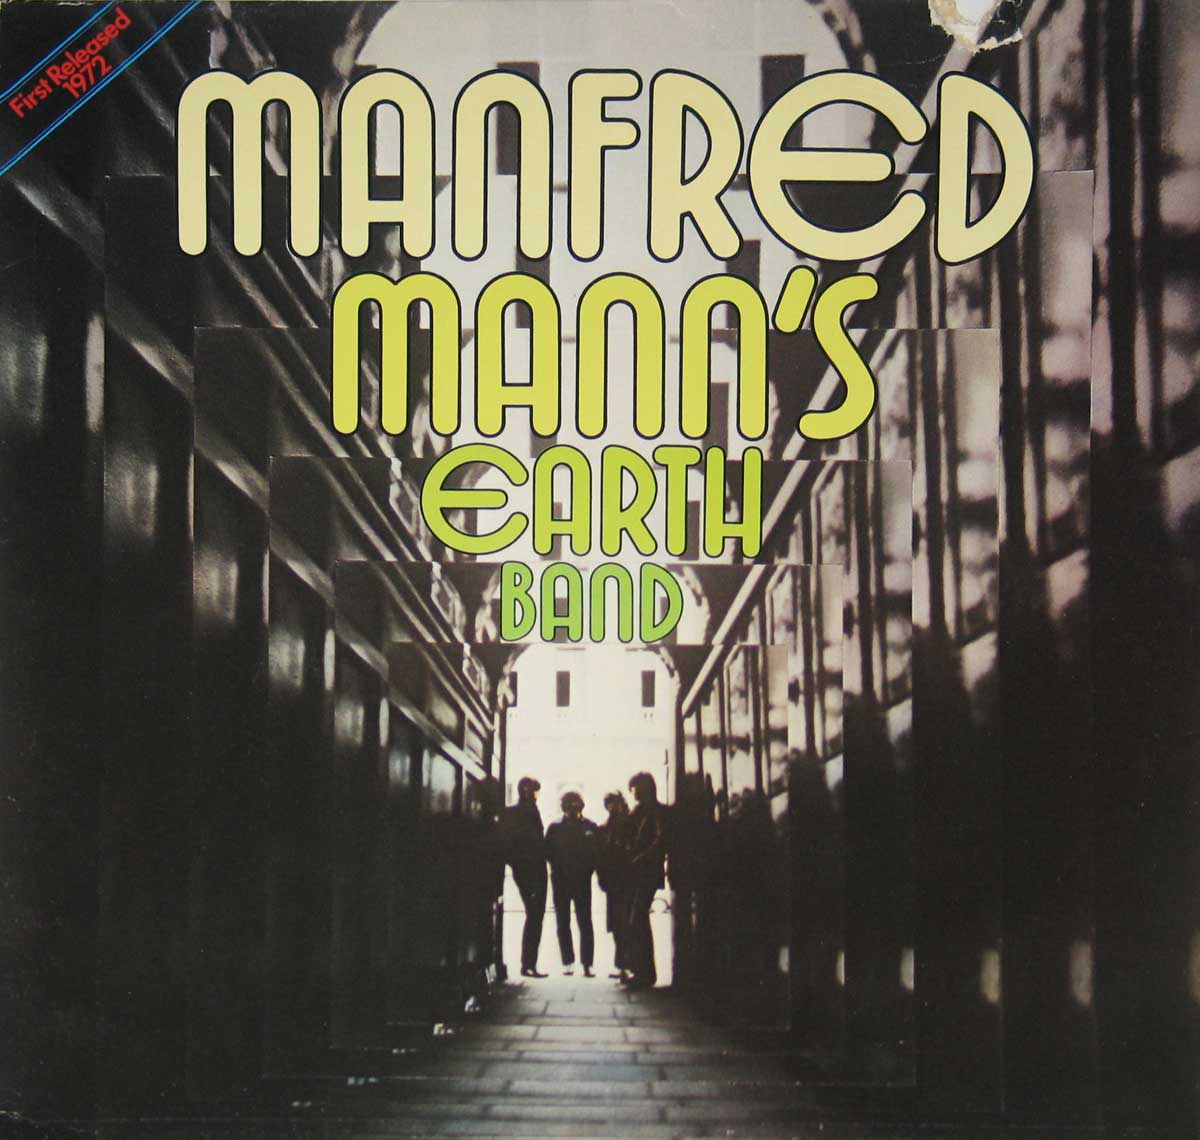 large album front cover photo of: MANFRED MANN'S EARTH BAND - S/T Self-titled Re-Issue 12" Vinyl LP Album 